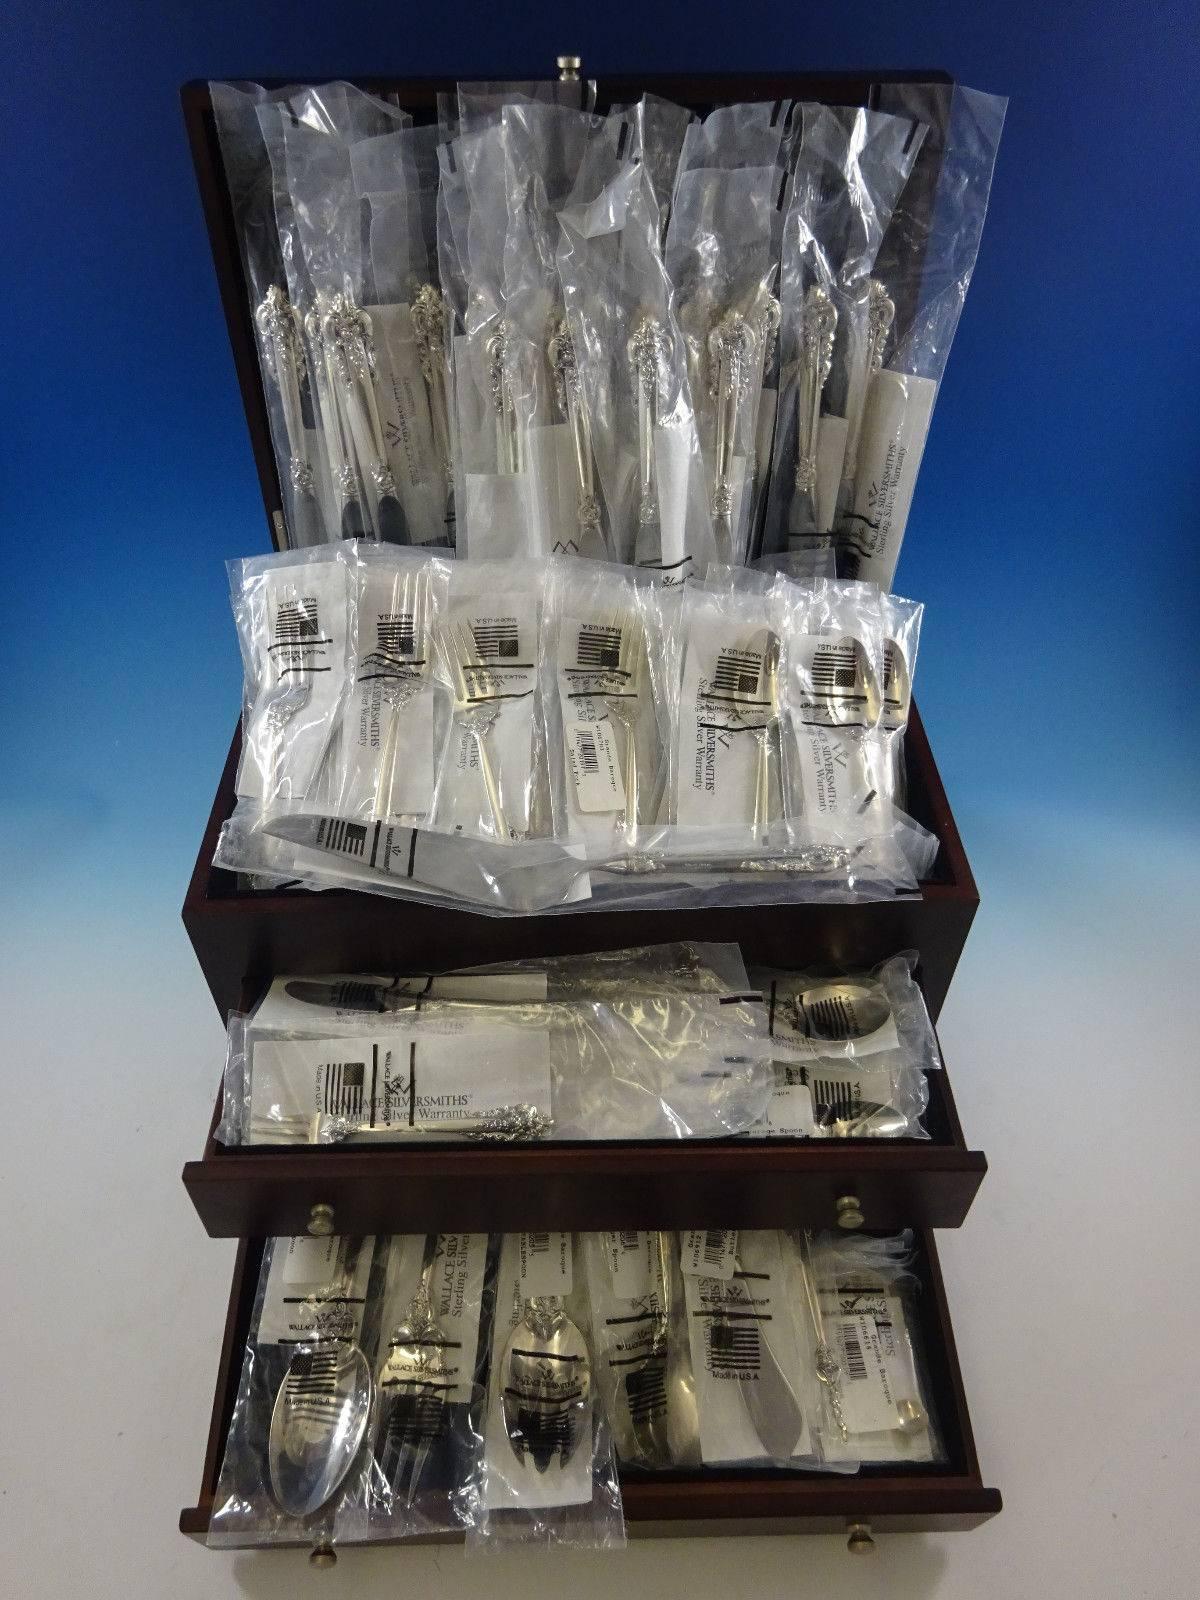 Massive brand new Grande Baroque by Wallace sterling silver flatware set of 198 pieces in factory sleeves. This set includes:

16 regular knives, 8 7/8